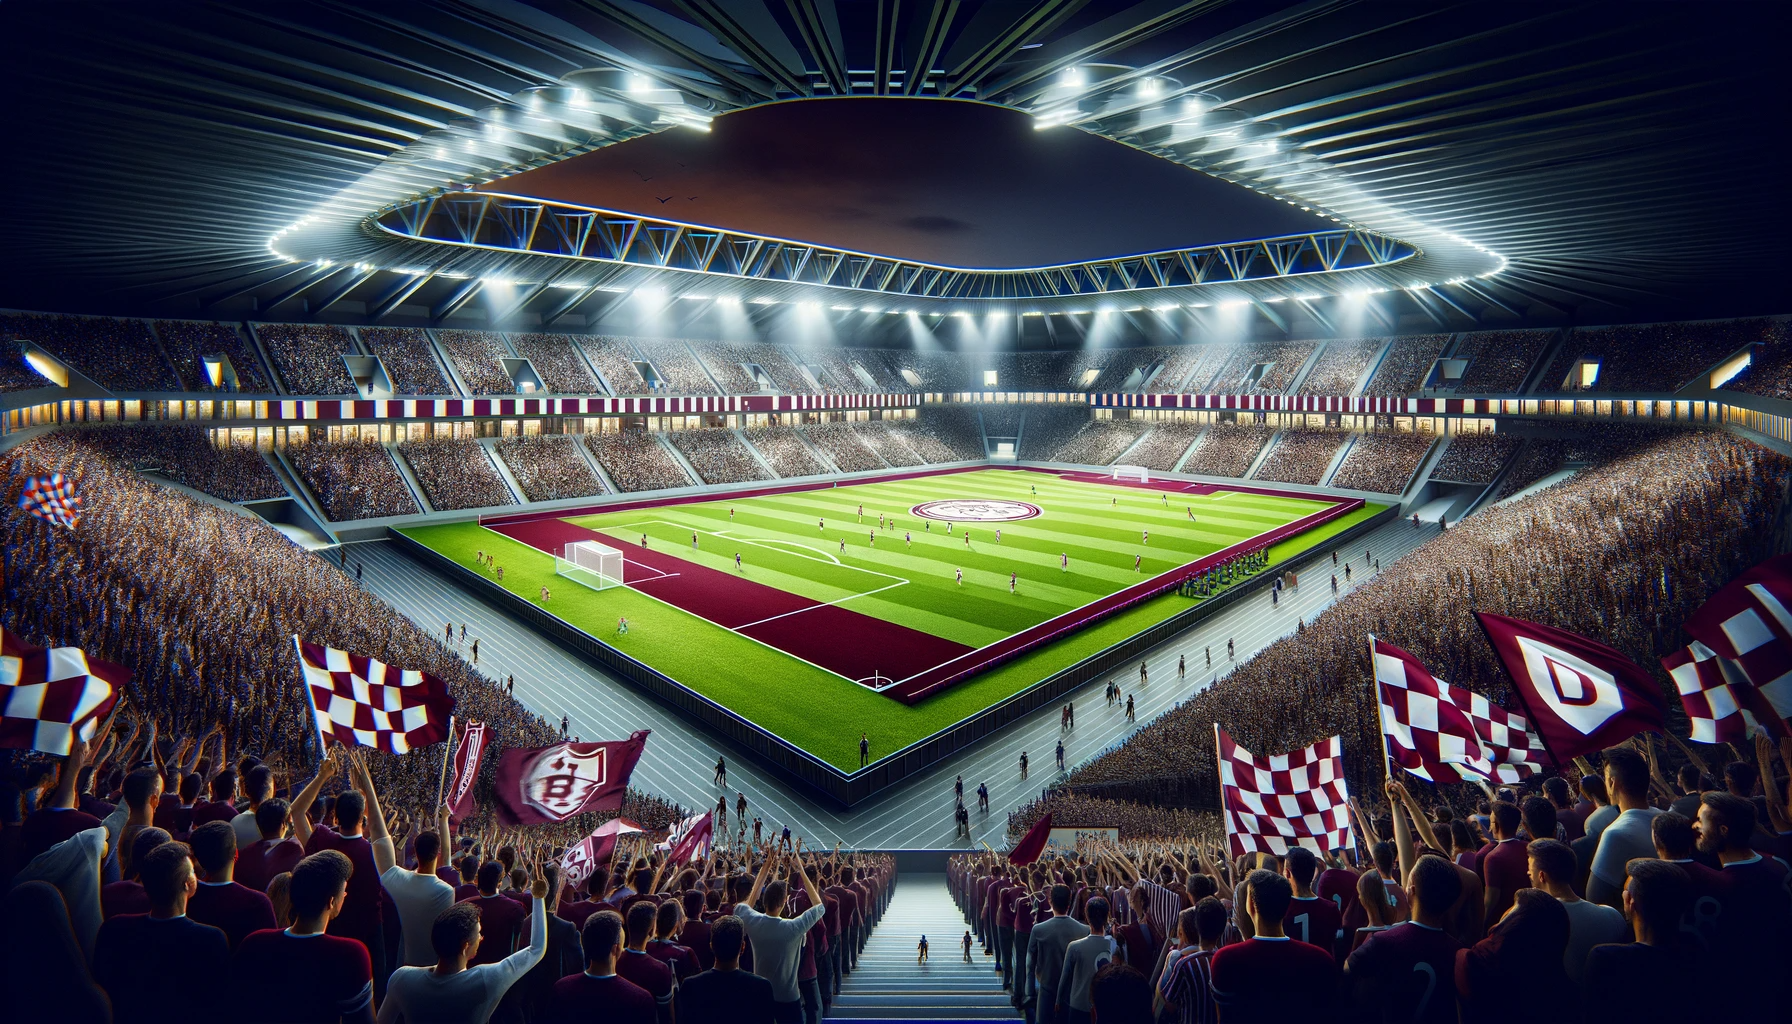 DALL·E 2023-11-20 23.19.59 - A vibrant football stadium designed for a team with the colors burgundy and white, reflecting the passionate spirit of a local district team. The stad